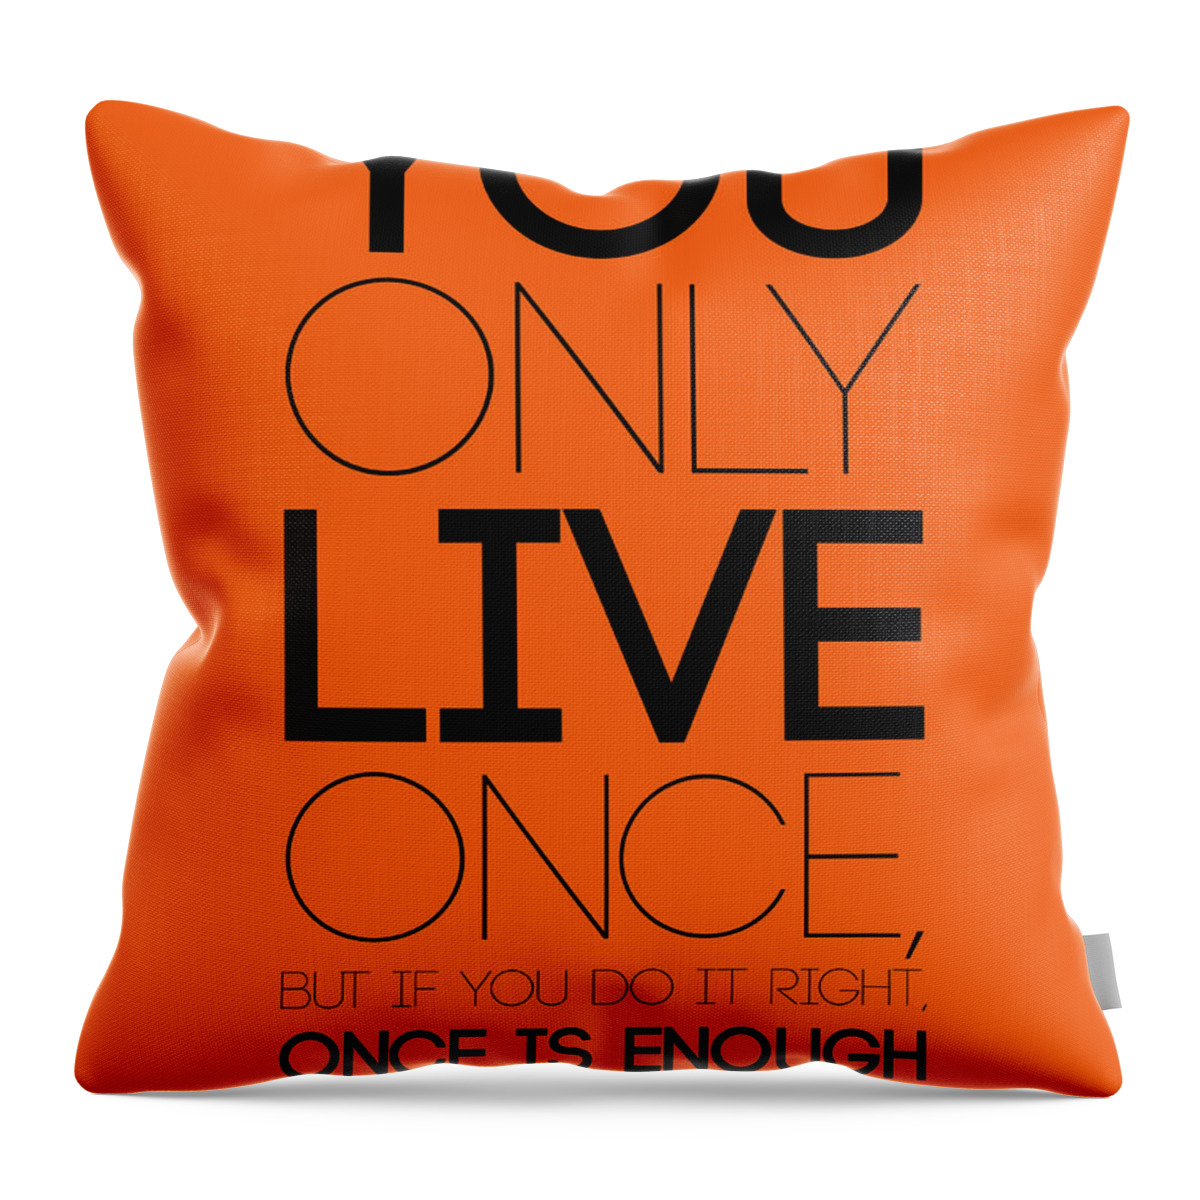 Motivational Throw Pillow featuring the digital art You Only Live Once Poster Orange by Naxart Studio